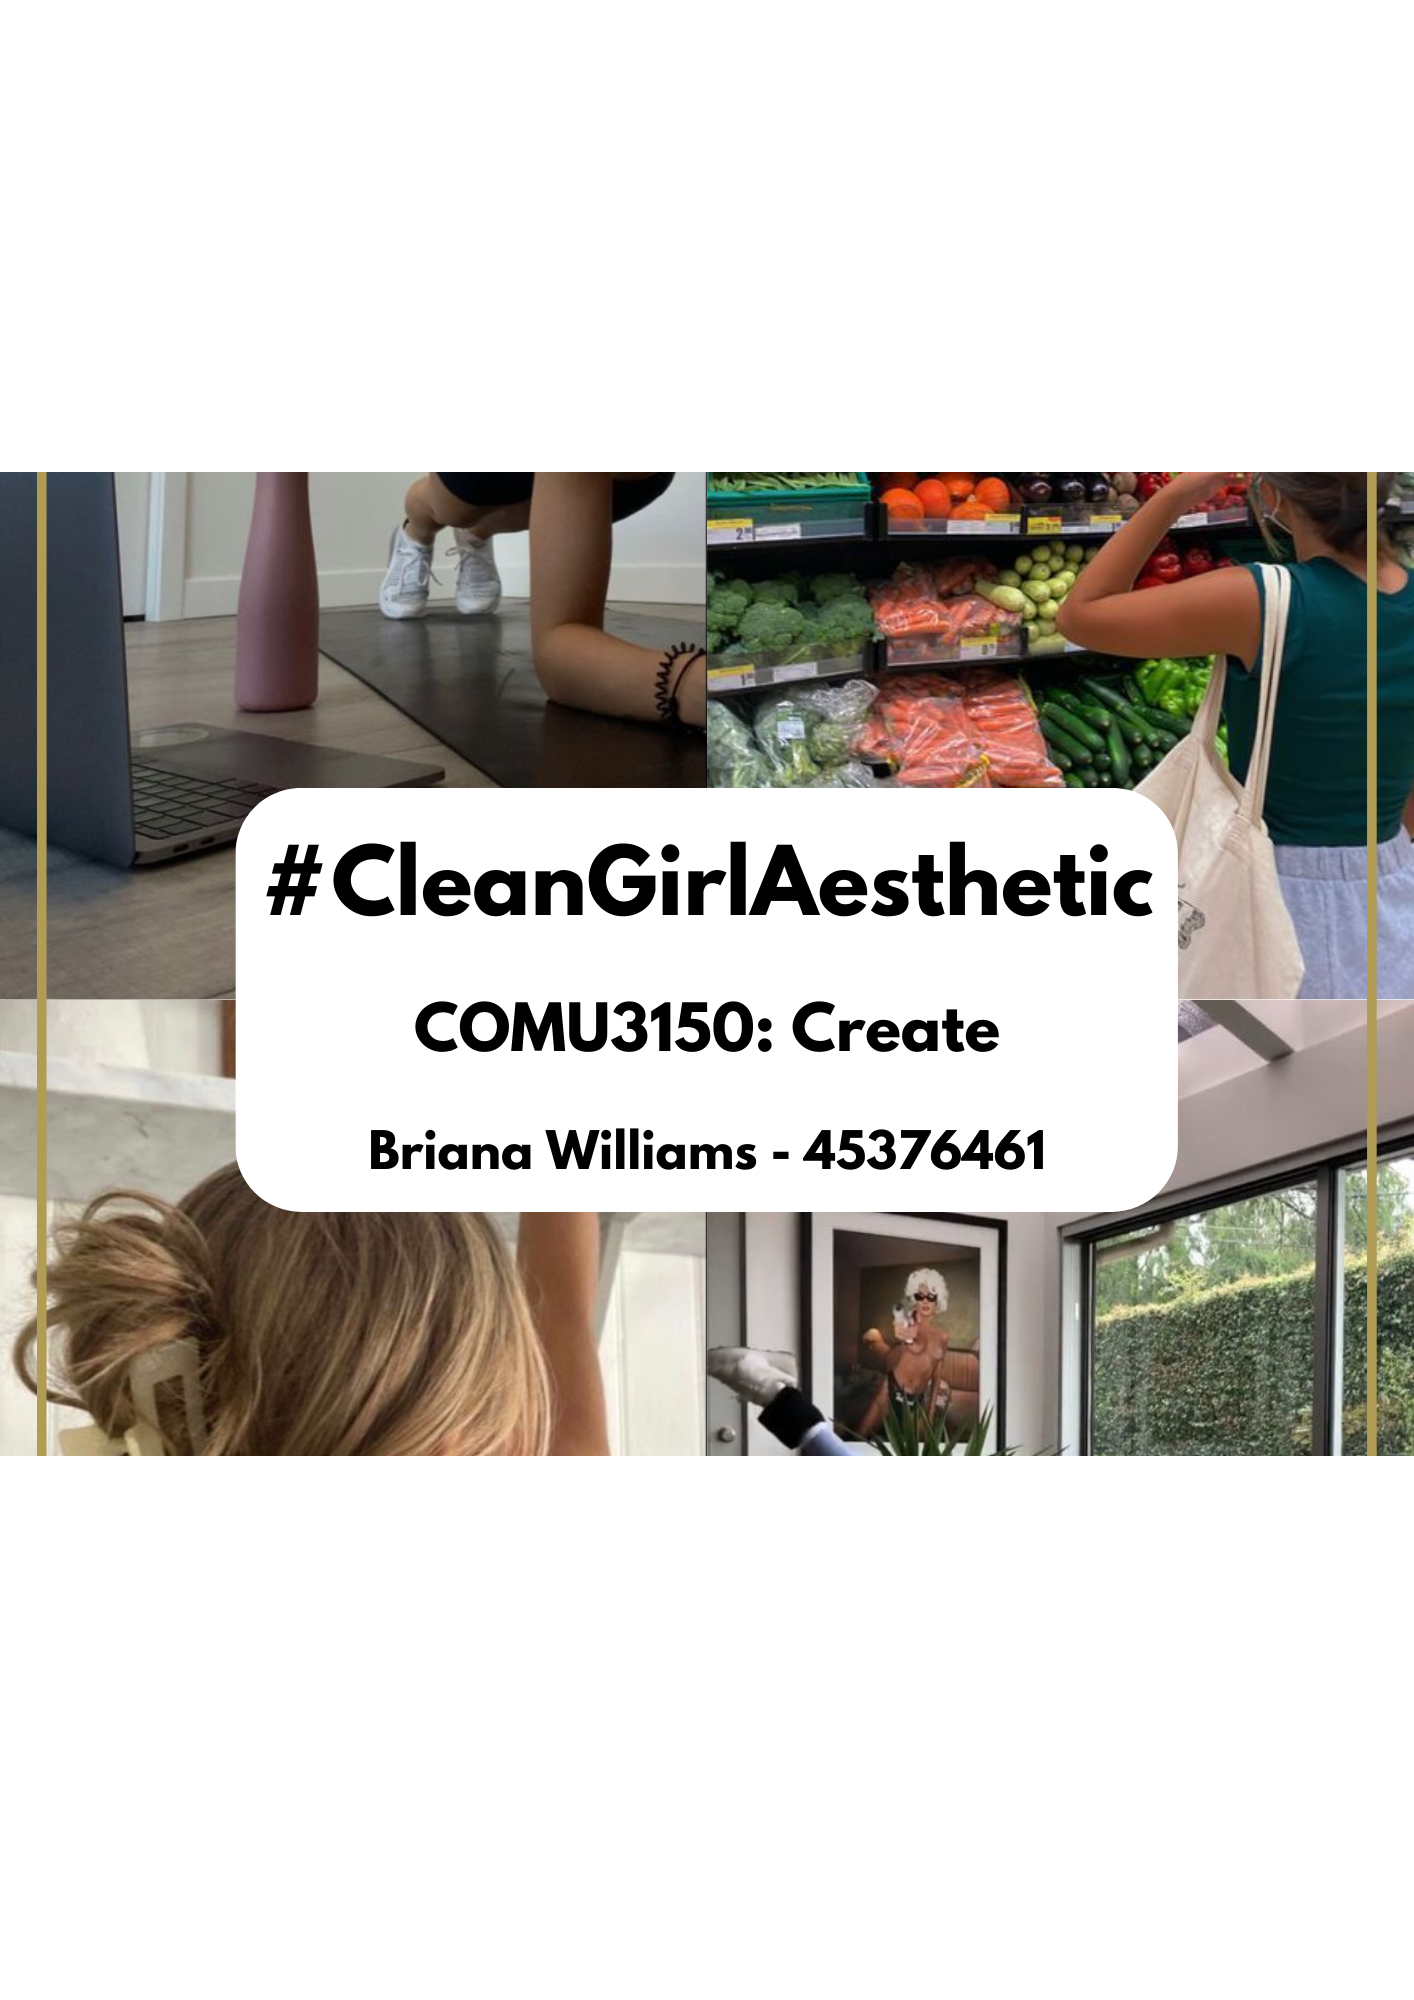 Unpacking the #CleanGirlAesthetic through the lens of Promotional Culture